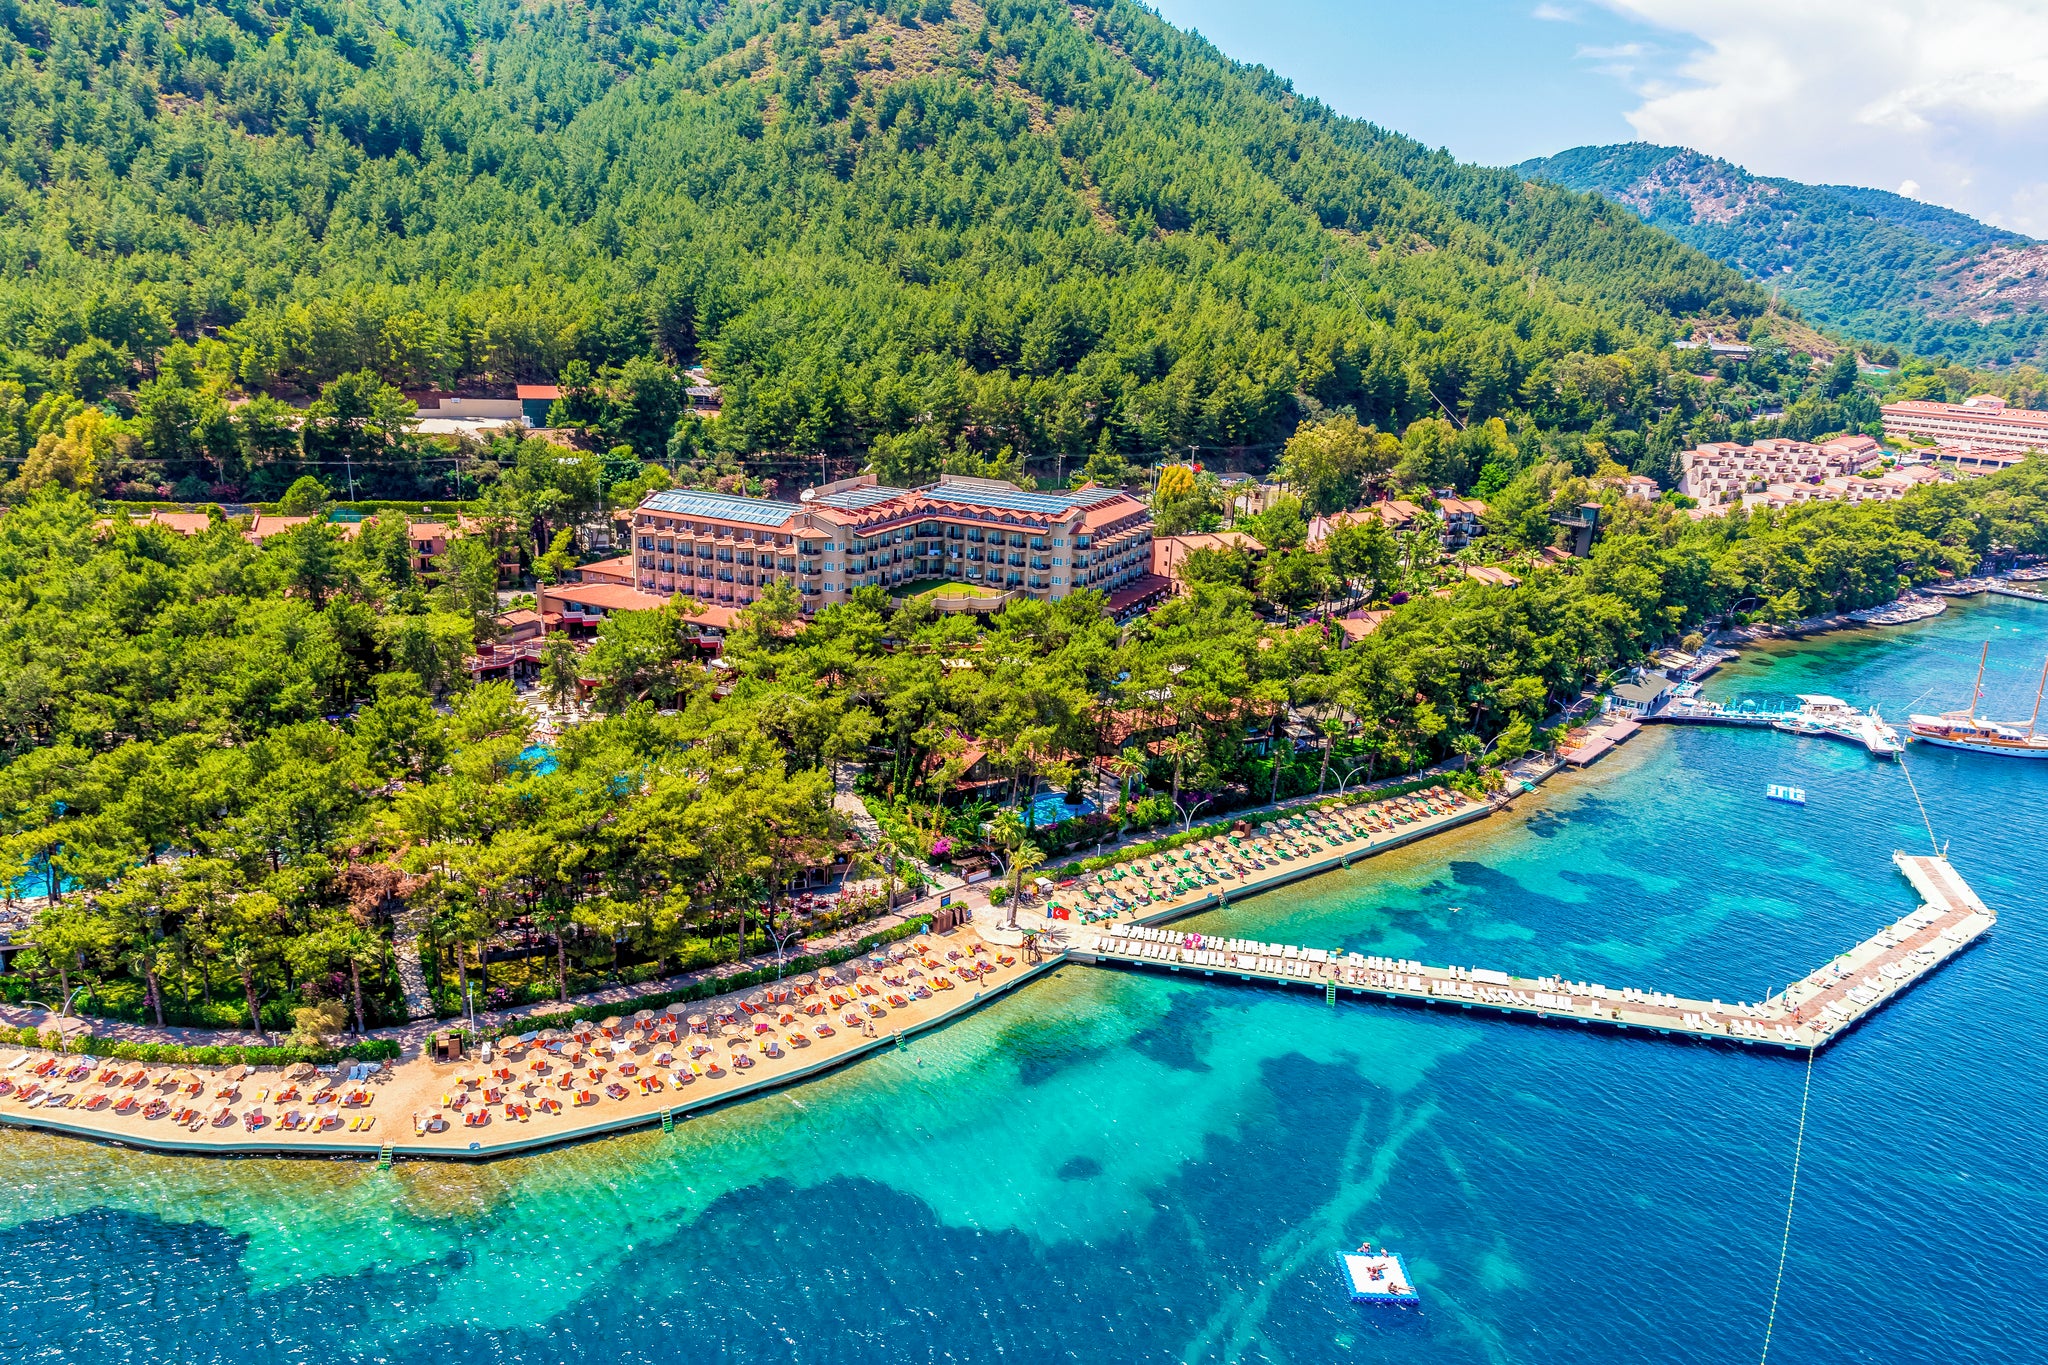 Enter our competition for a chance to win an idyllic family break at Grand Yazici Club Marmaris Palace, Turkey